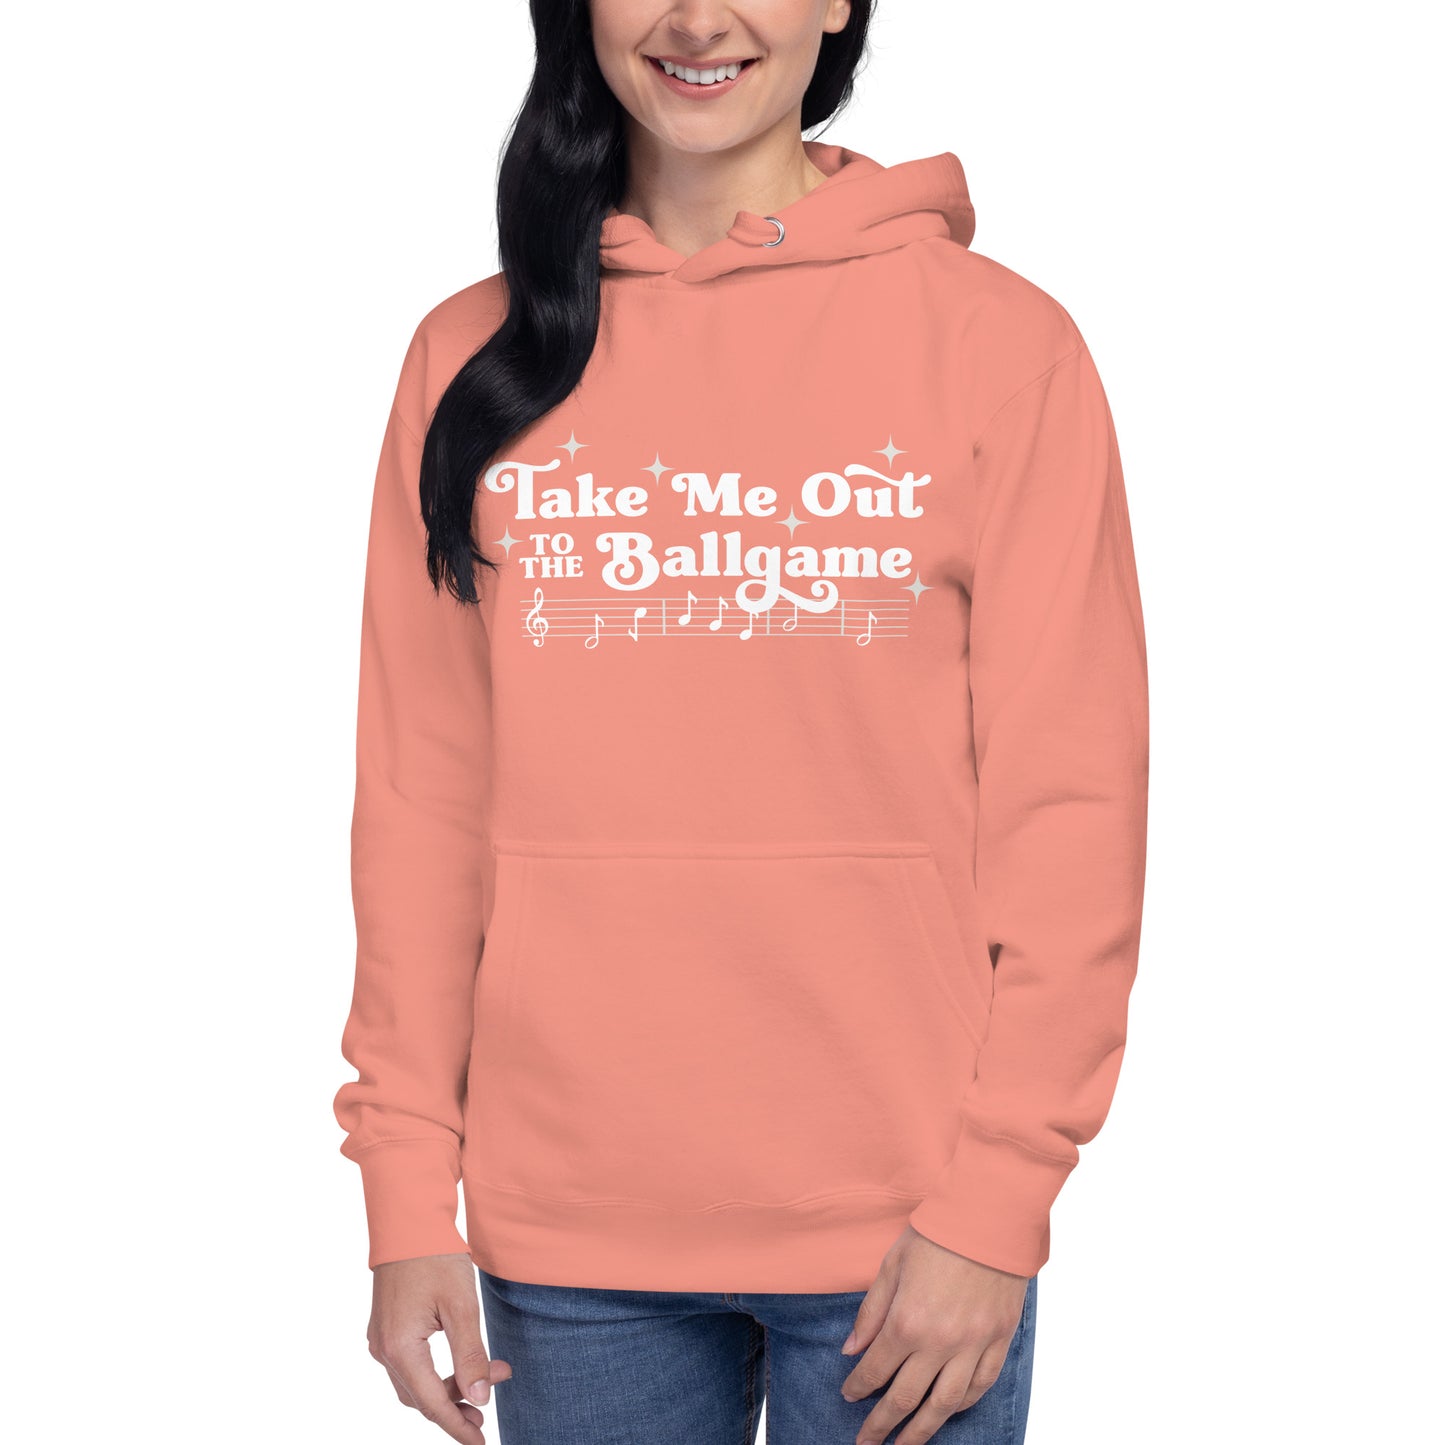 Image of woman wearing peach hoodie with design of "Take Me Out to the Ballgame" with coordinating musical notes in white located on centre chest. This design is exclusive to Tailgate Mercantile and available only online.